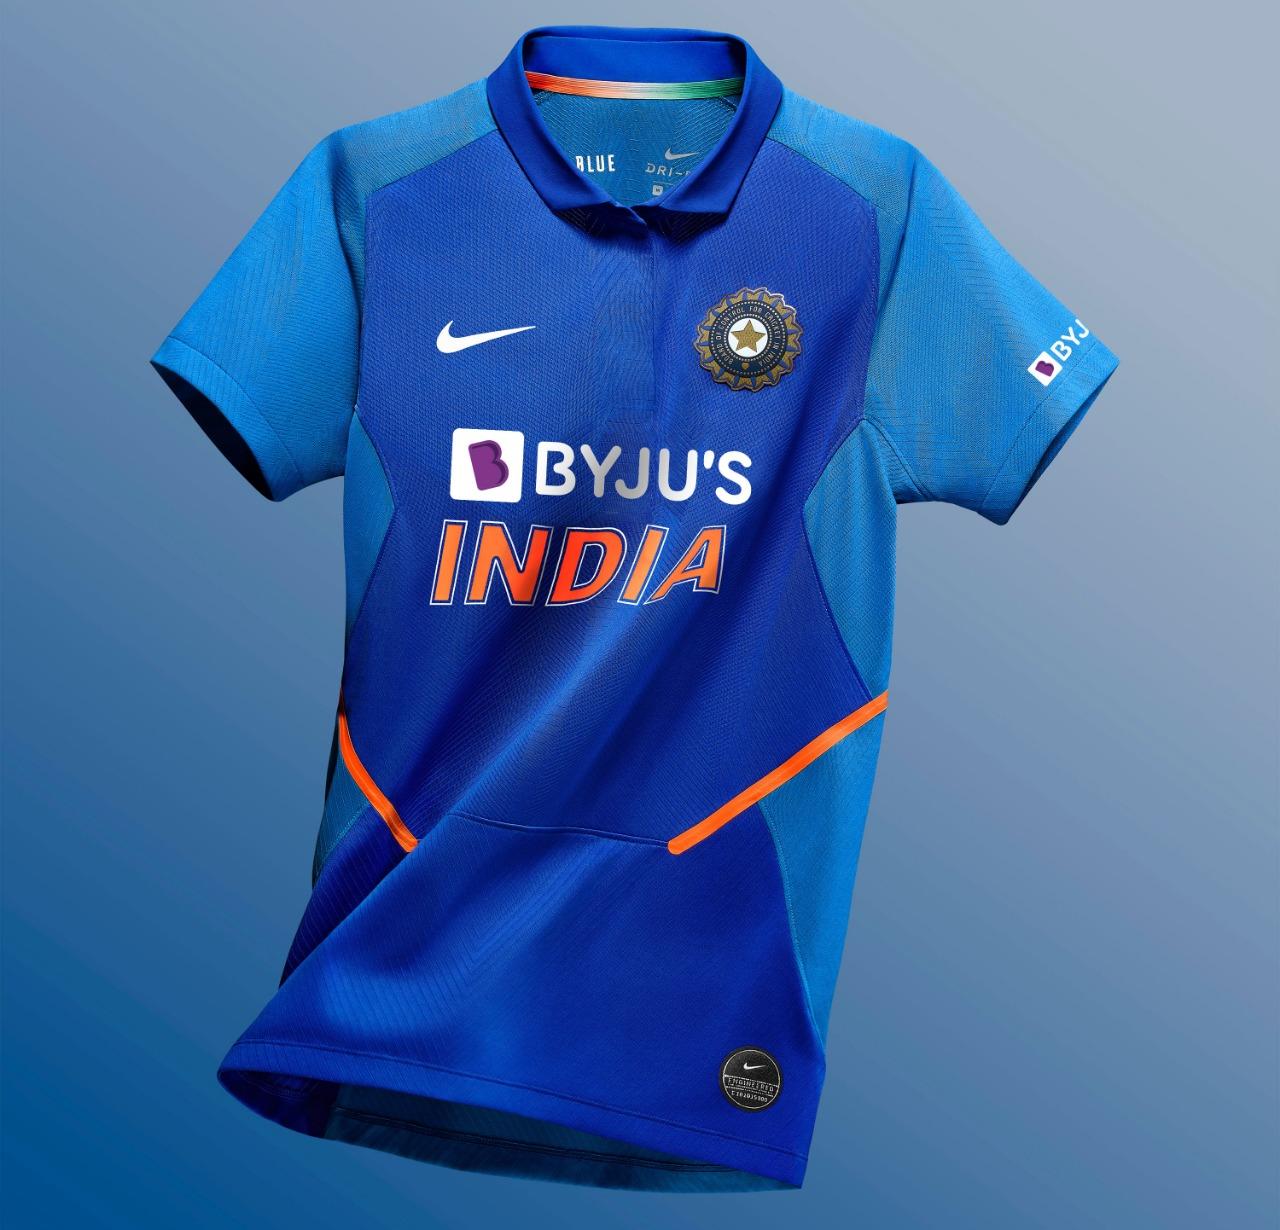 byju's indian team jersey